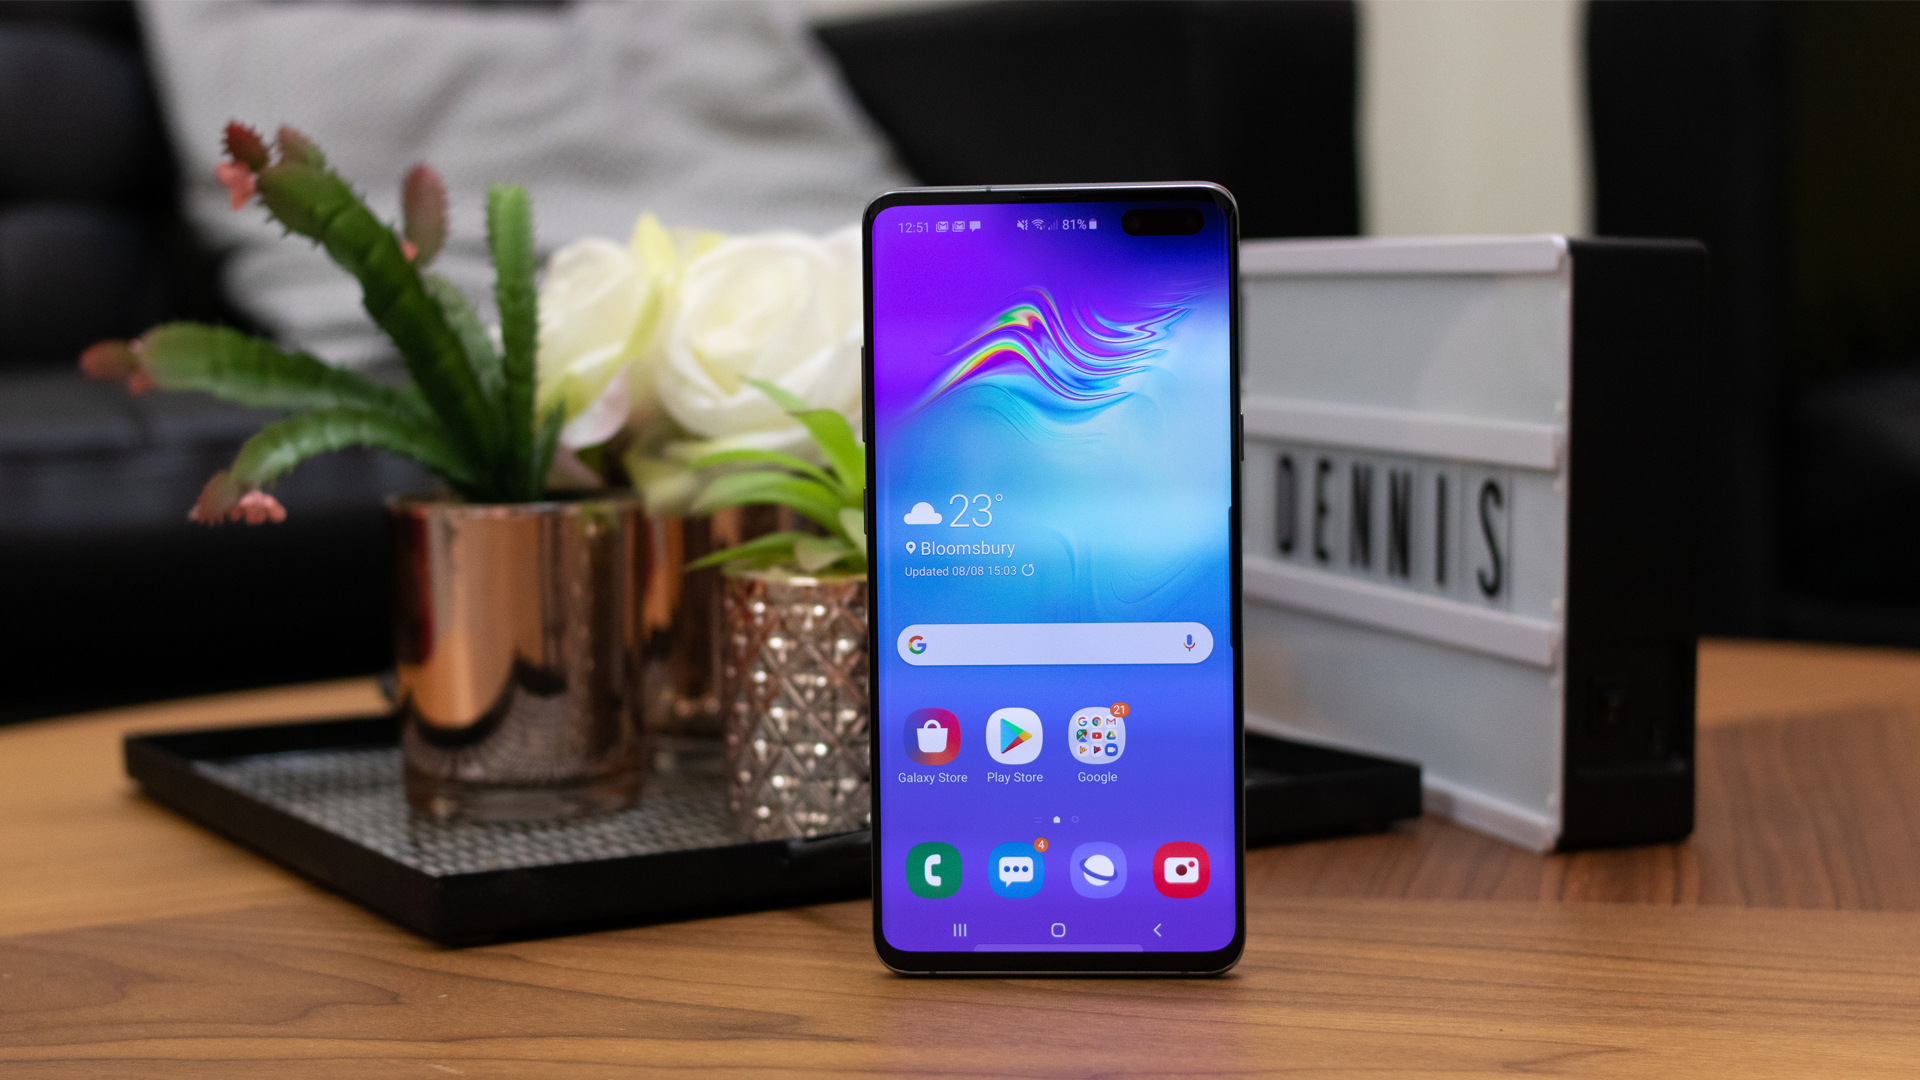 Samsung Galaxy S10 5G review: A flagship to withstand the test of